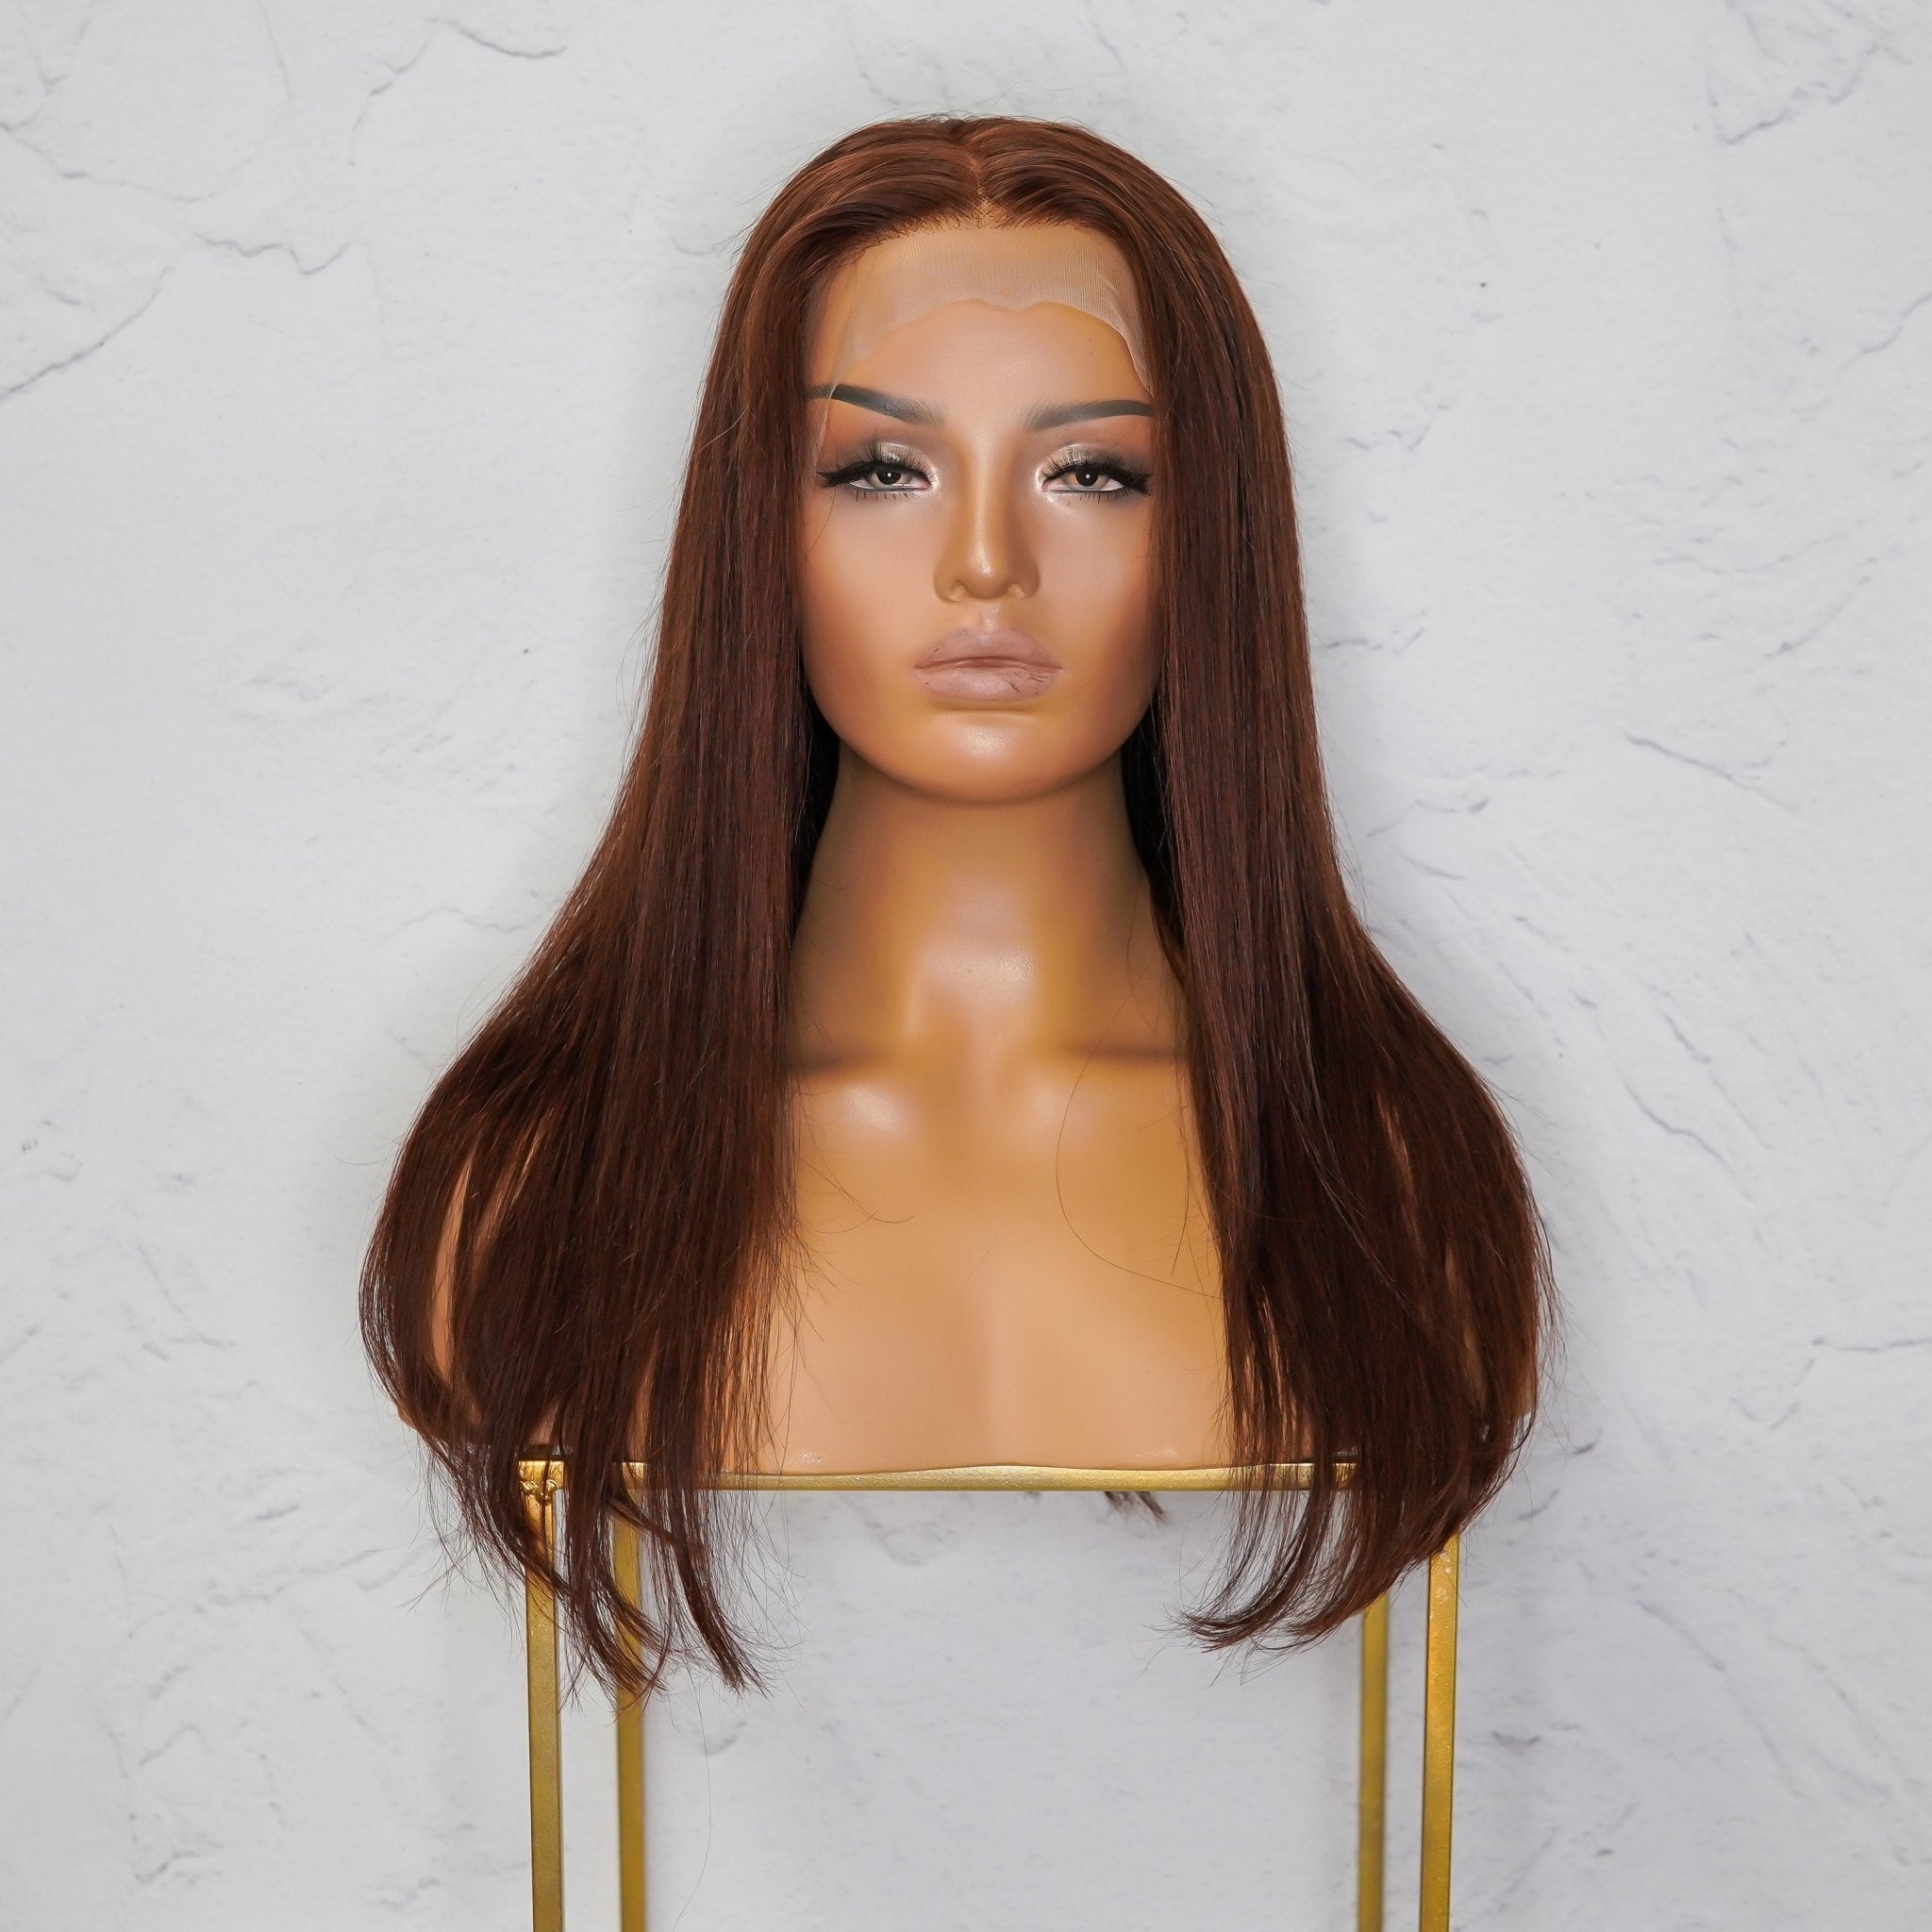 SOPHIE Human Hair Lace Front Wig ** READY TO SHIP ** - Milk & Honey